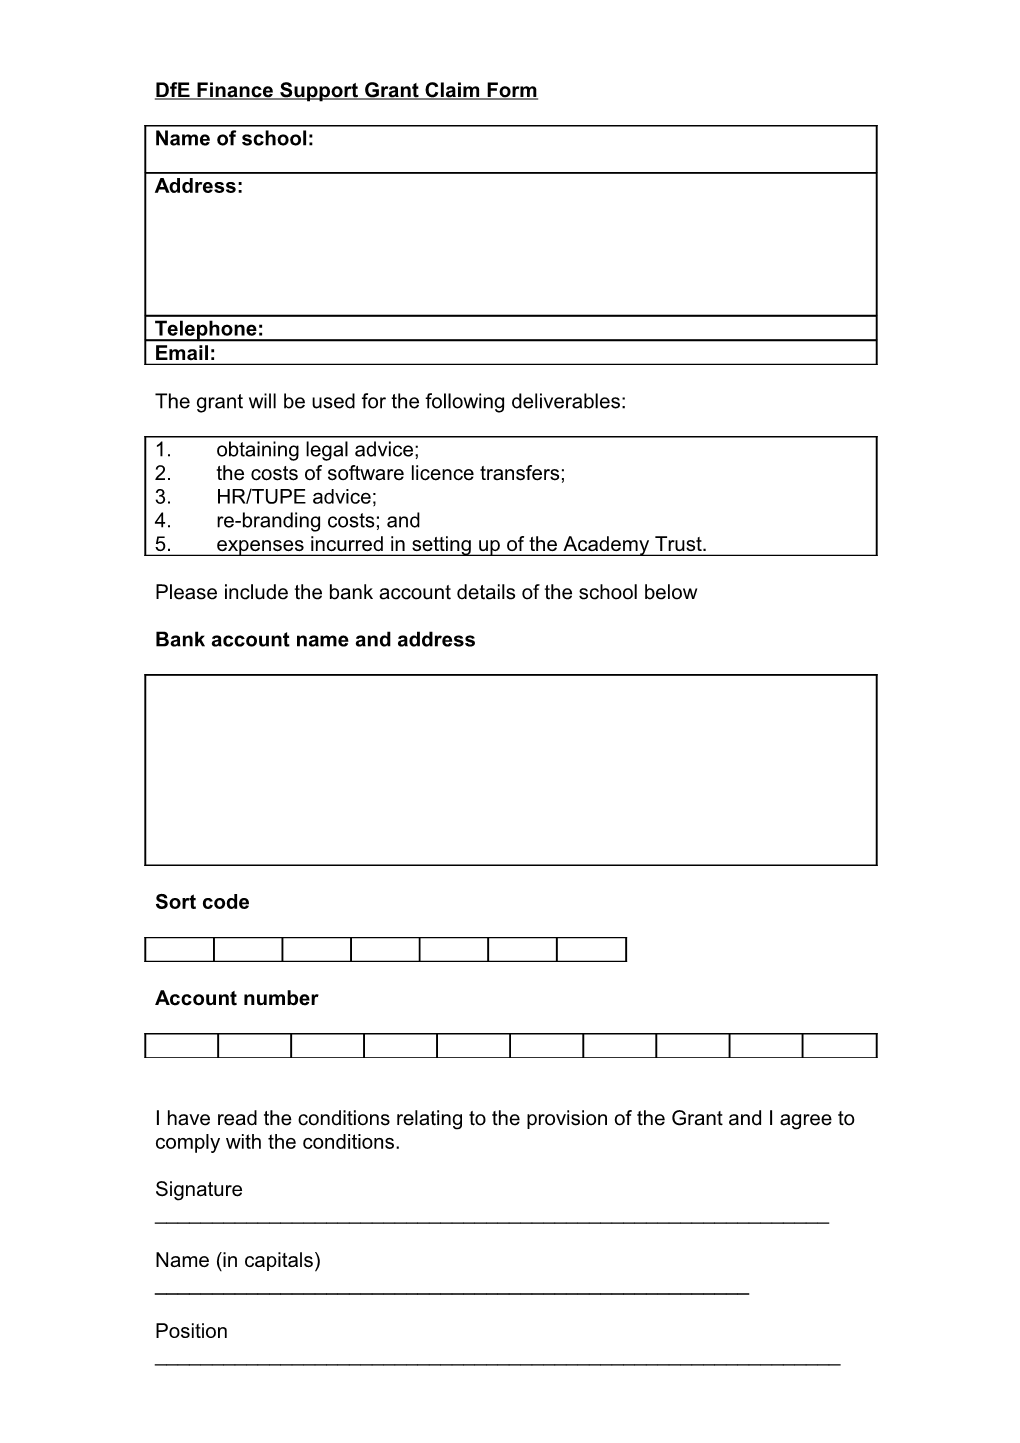 Dfe Finance Support Grant Claim Form